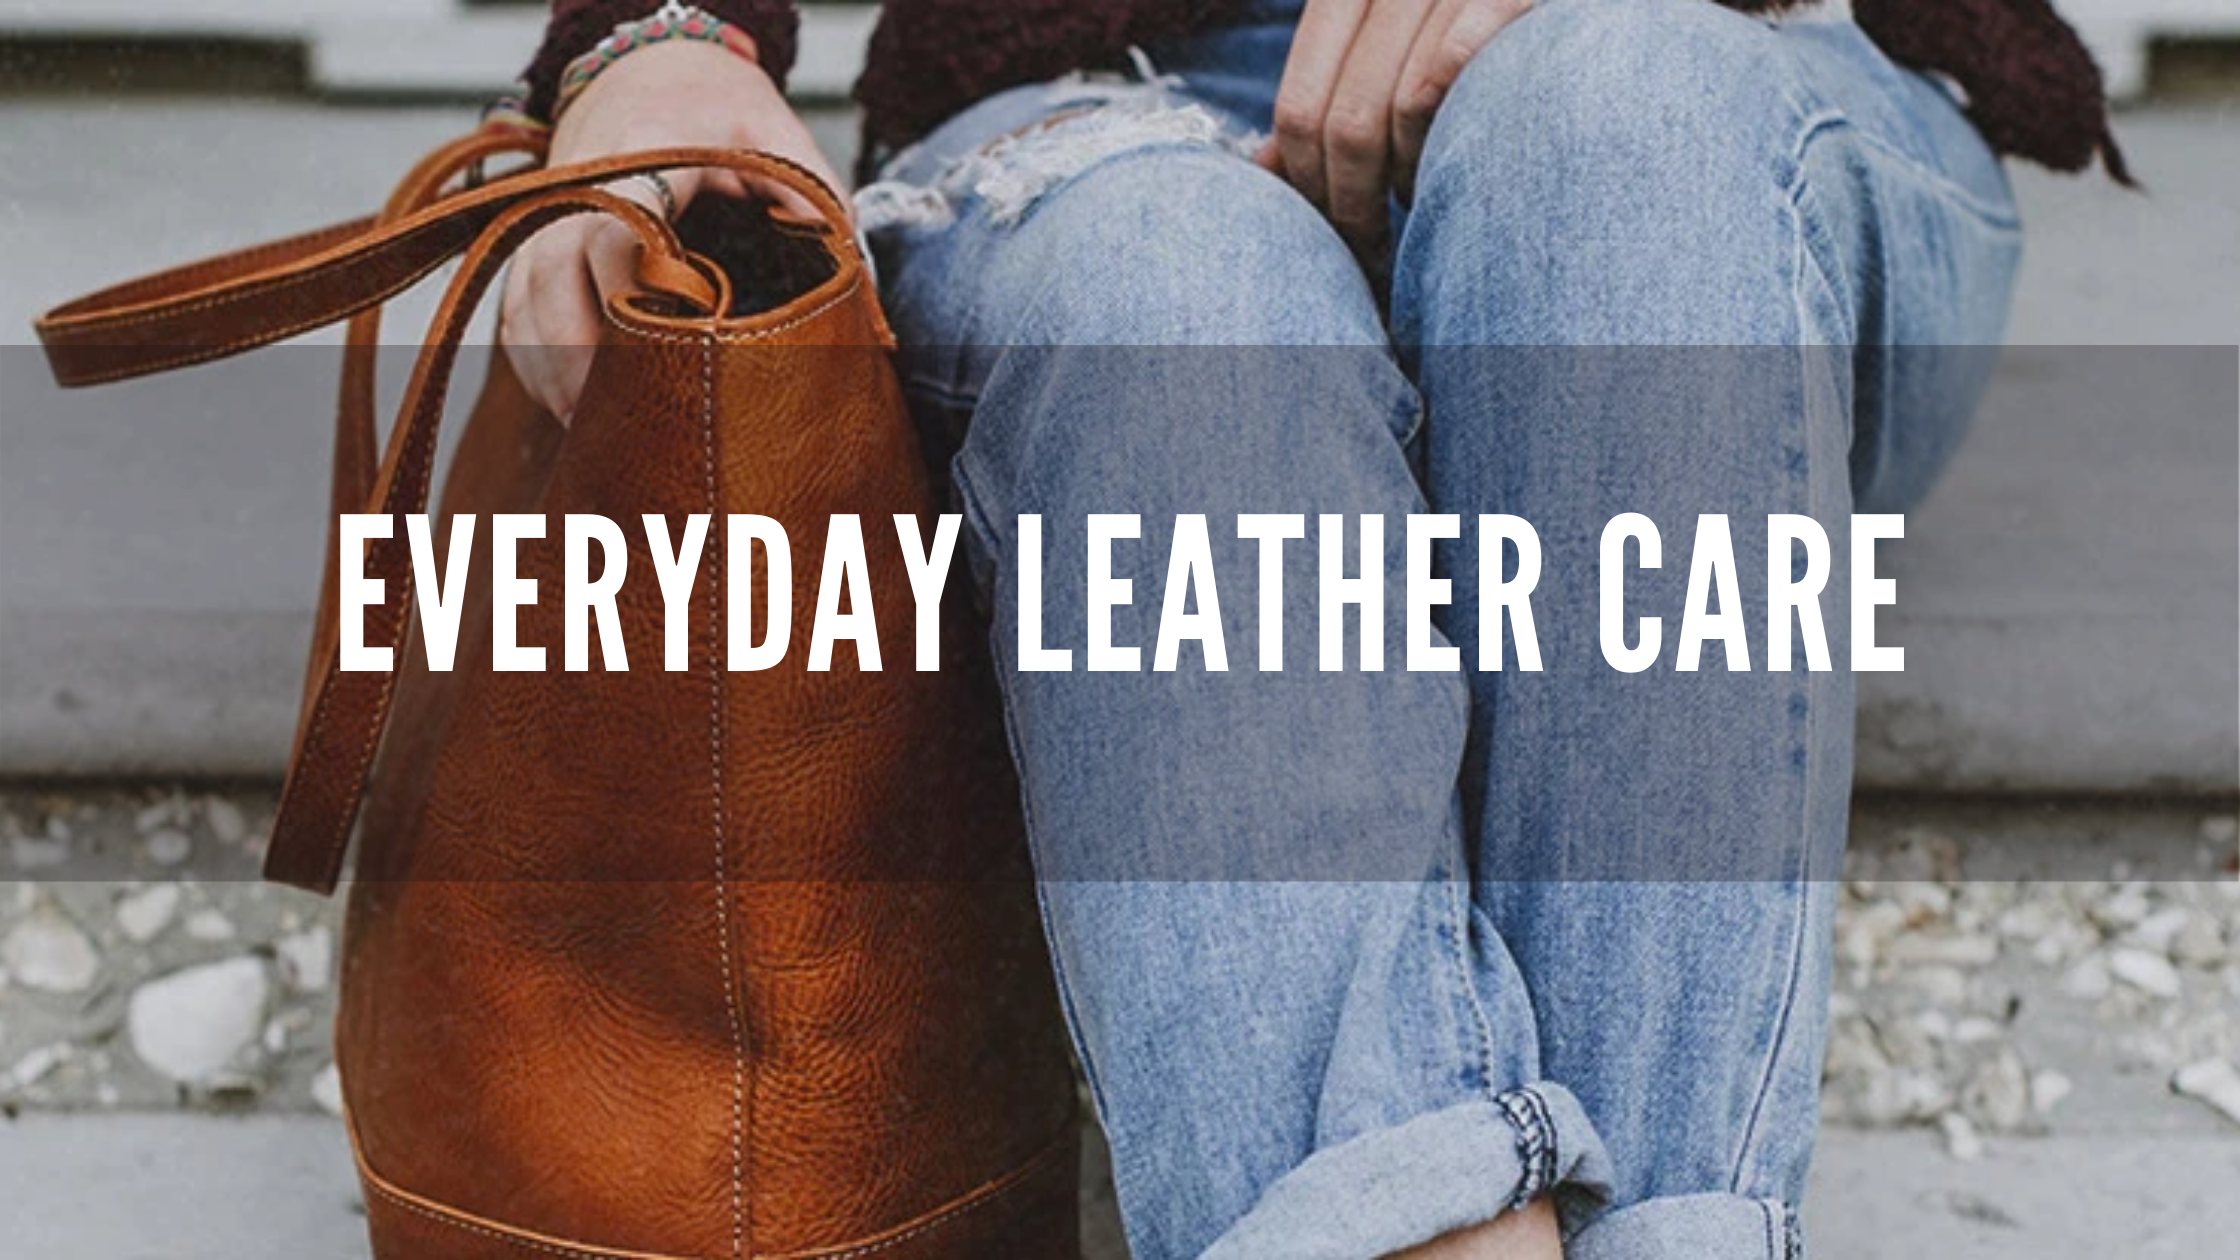 Leather Goods - Professional Insights for Selection, Care, and Use